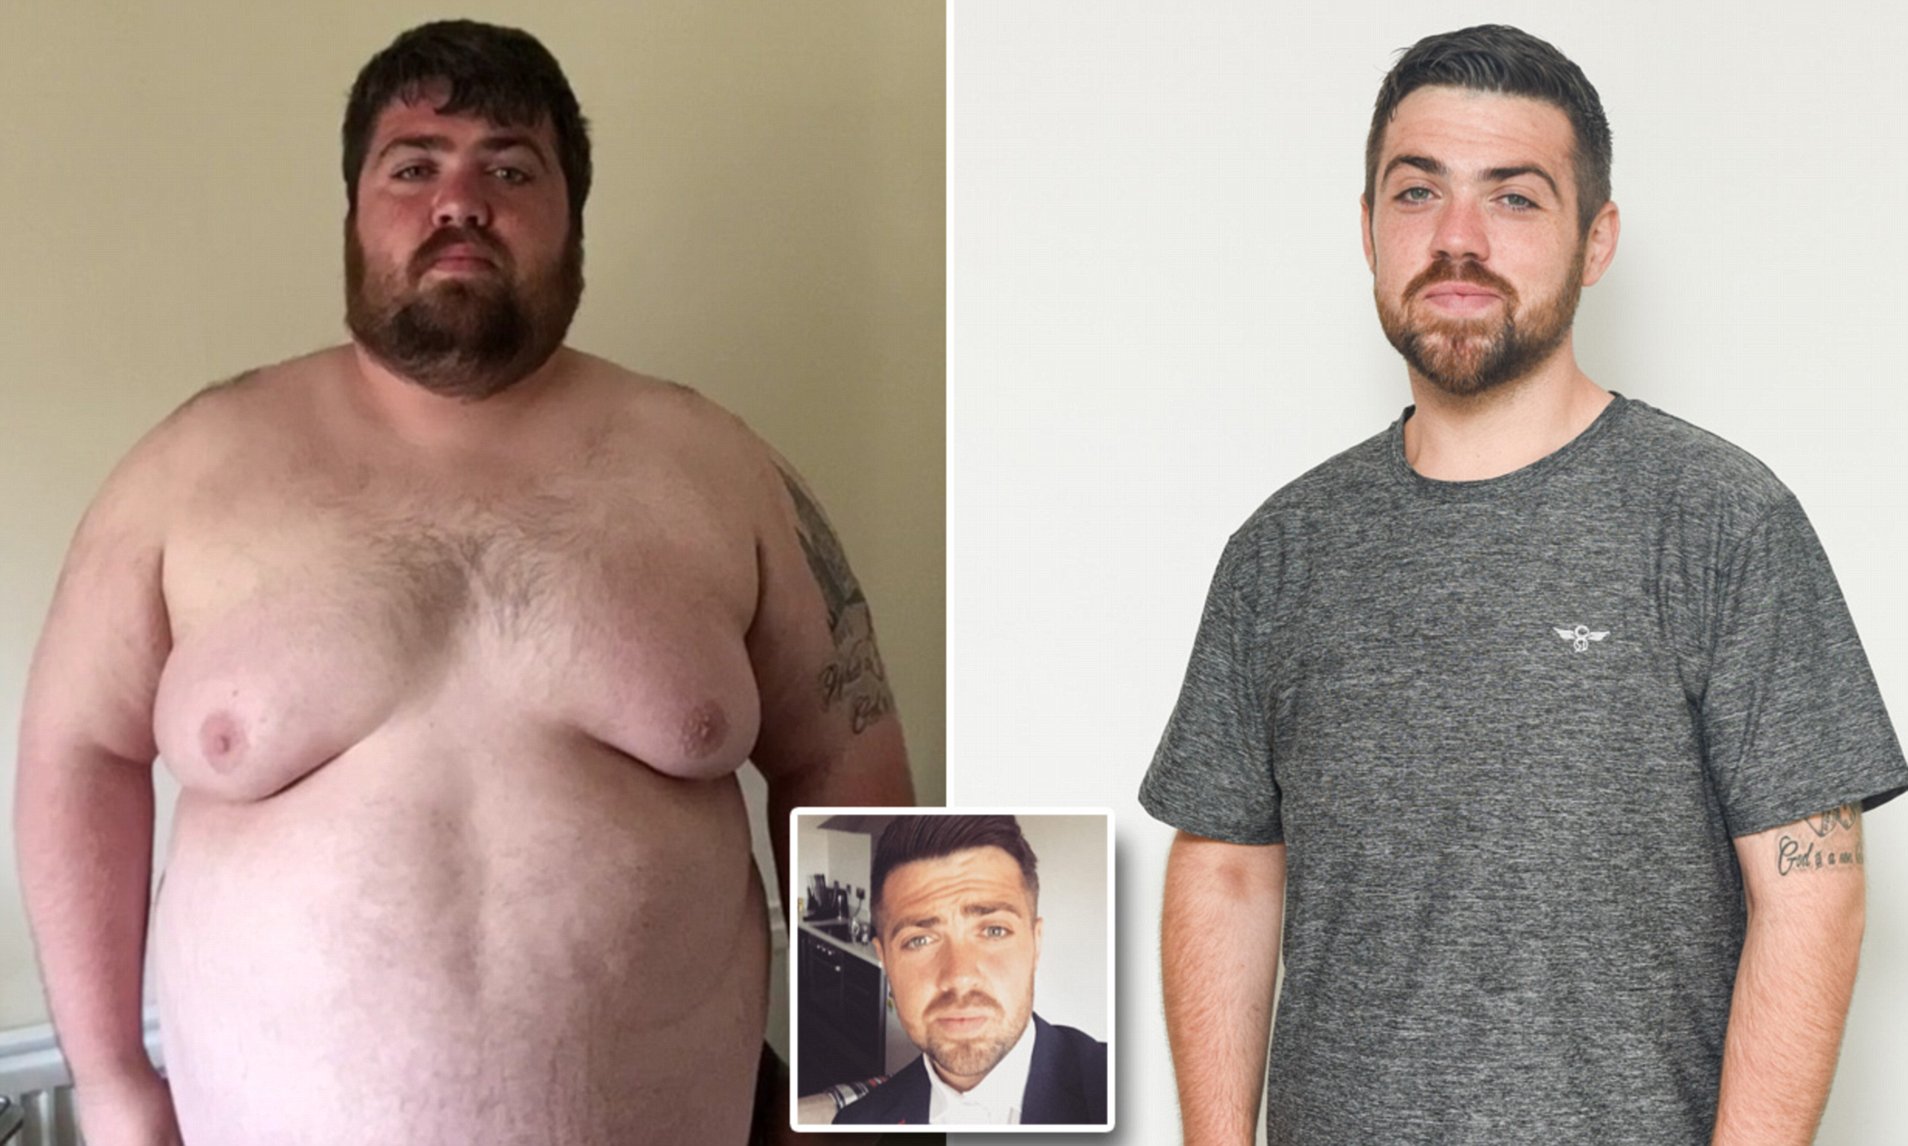 17 stone 4 in pounds